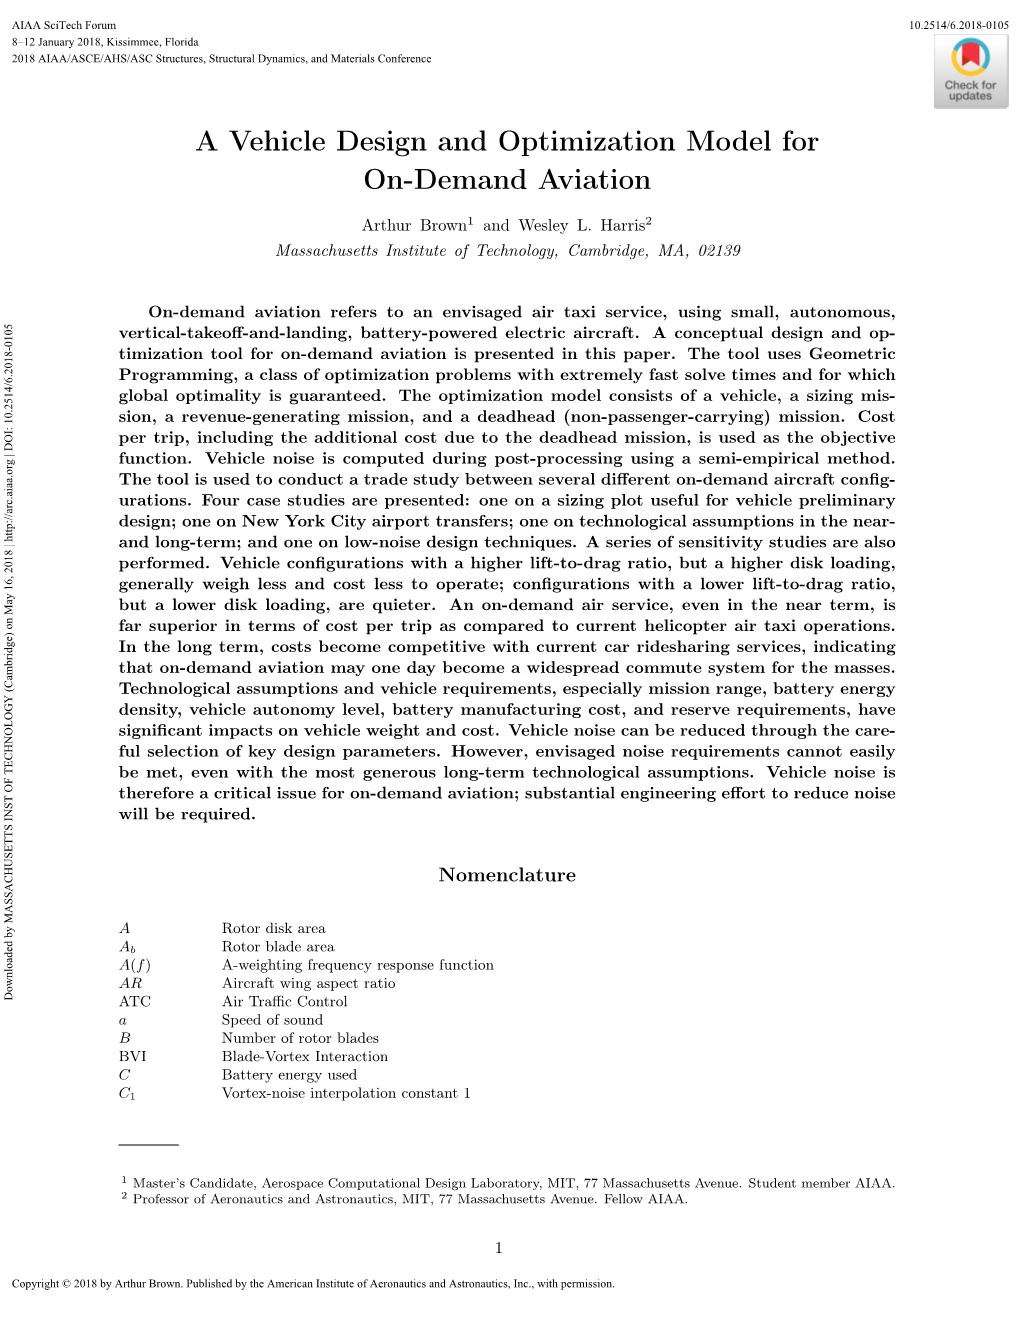 A Vehicle Design and Optimization Model for On-Demand Aviation